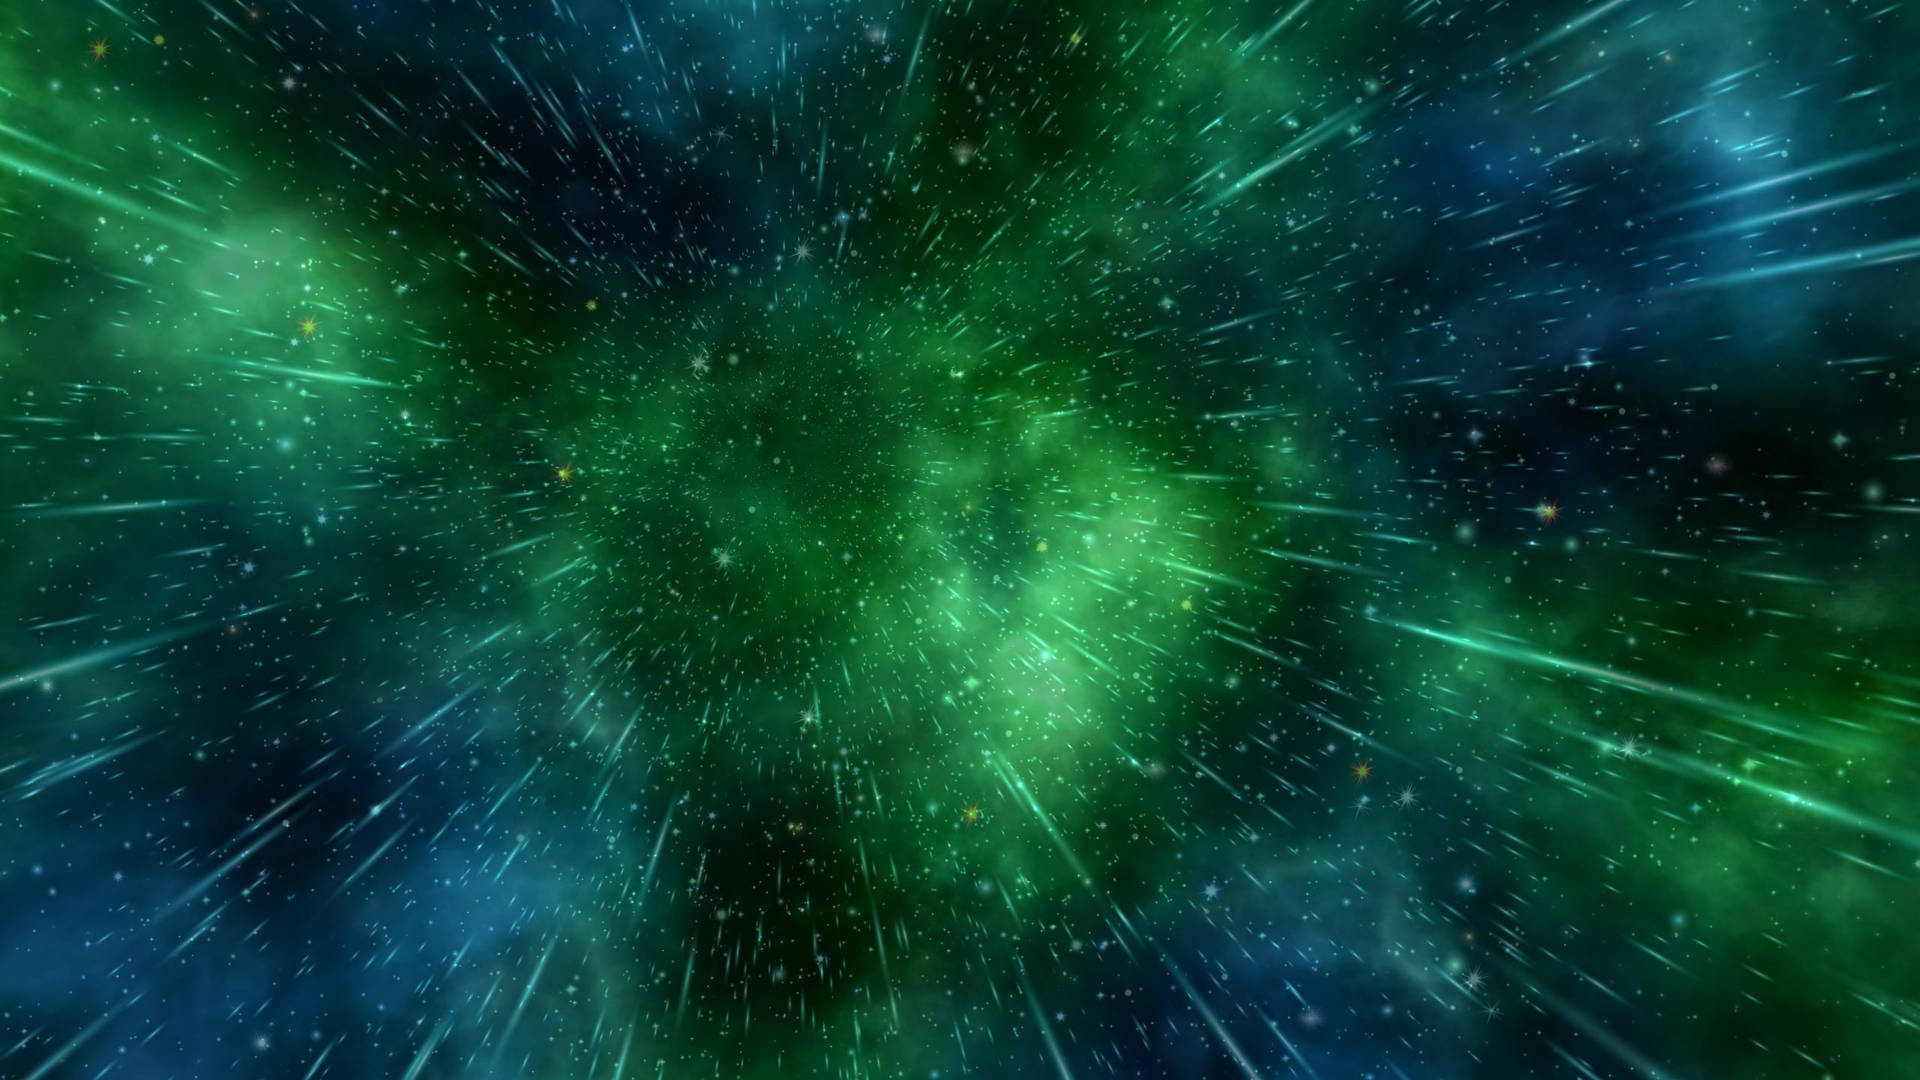 Enjoy The Beauty Of A Mysterious Animated Galaxy Background